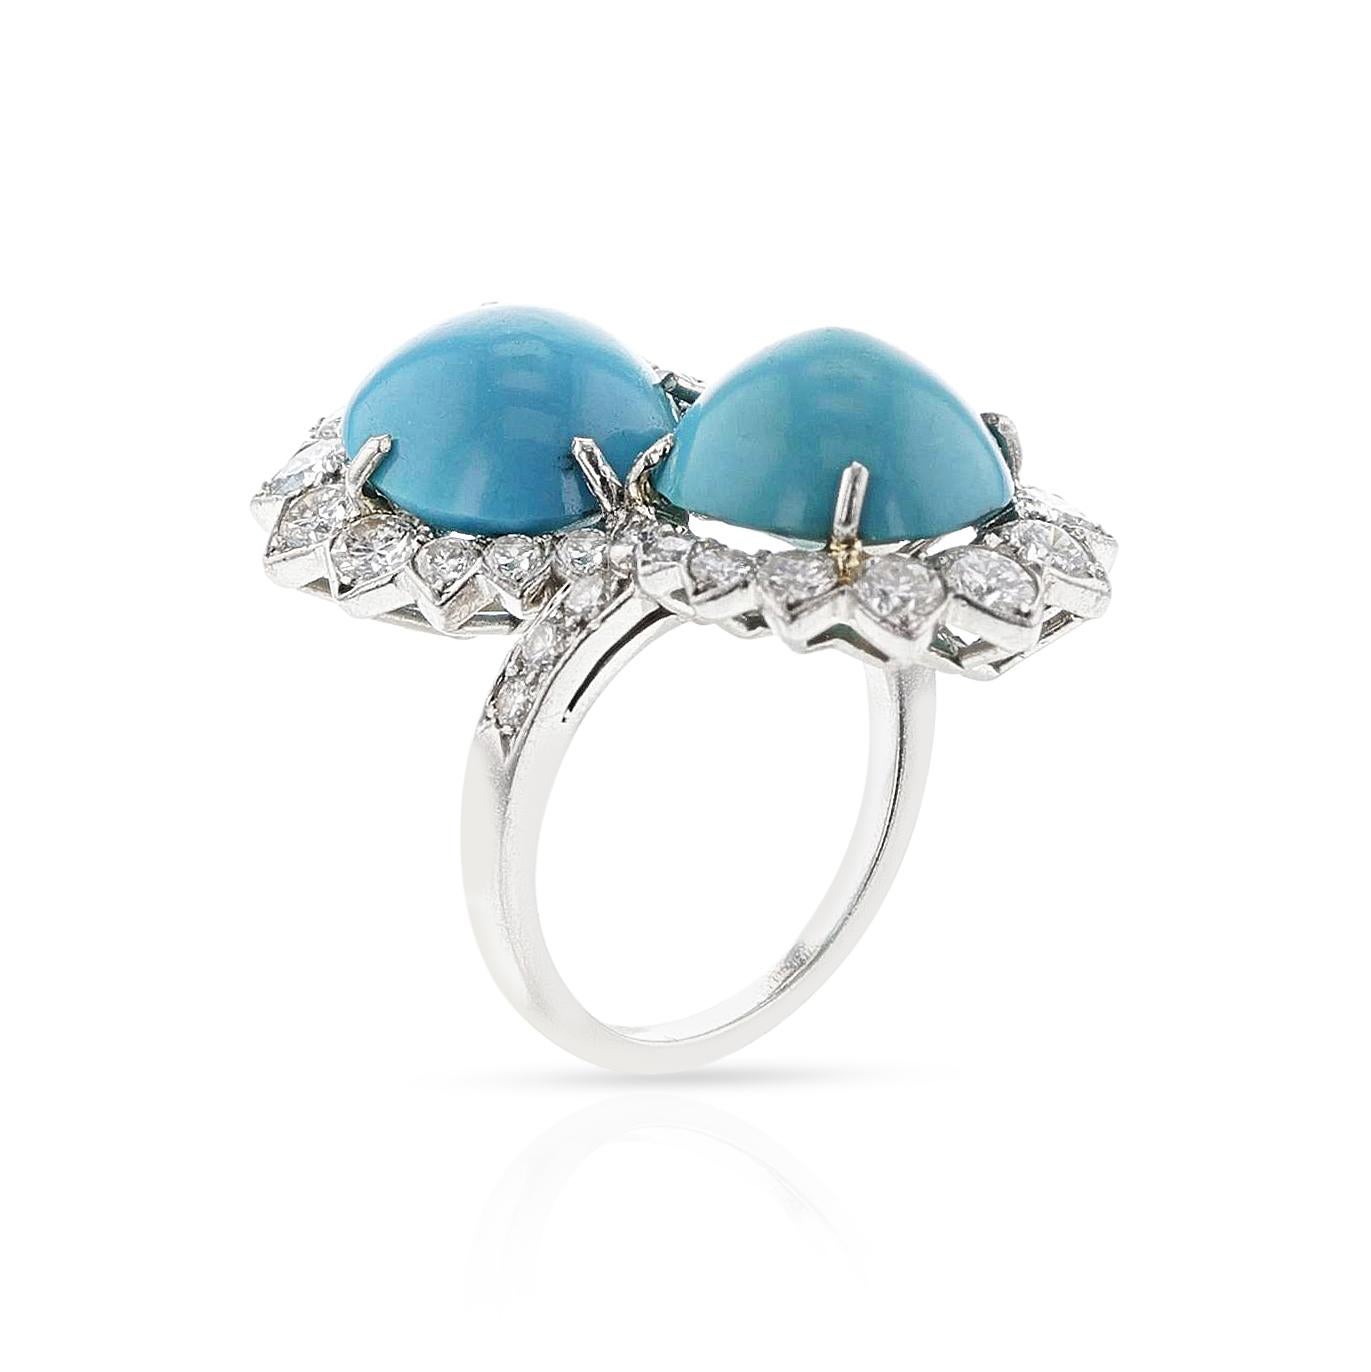 A Van Cleef & Arpels Toi et Moi Turquoise and Diamond Ring made in Platinum. Circa 1960s. The total weight of the diamonds is appx. 2.25 carats. The total weight is 11.07 grams. The ring size is US 5.50. The length of the top of the ring is 1.15